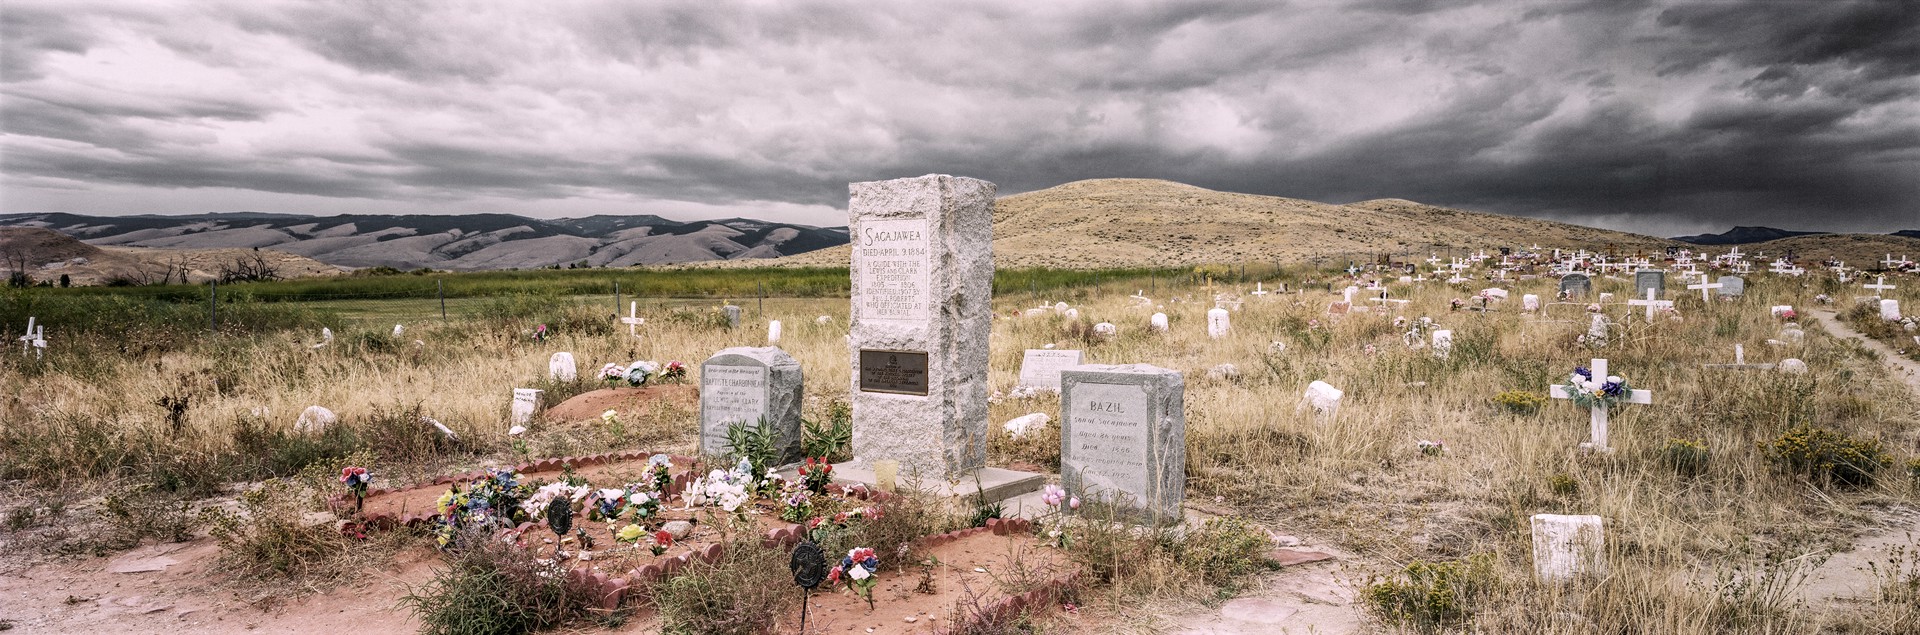 Sacajawea Gravesite, Wind River Reservation, Wyoming by Lawrence McFarland